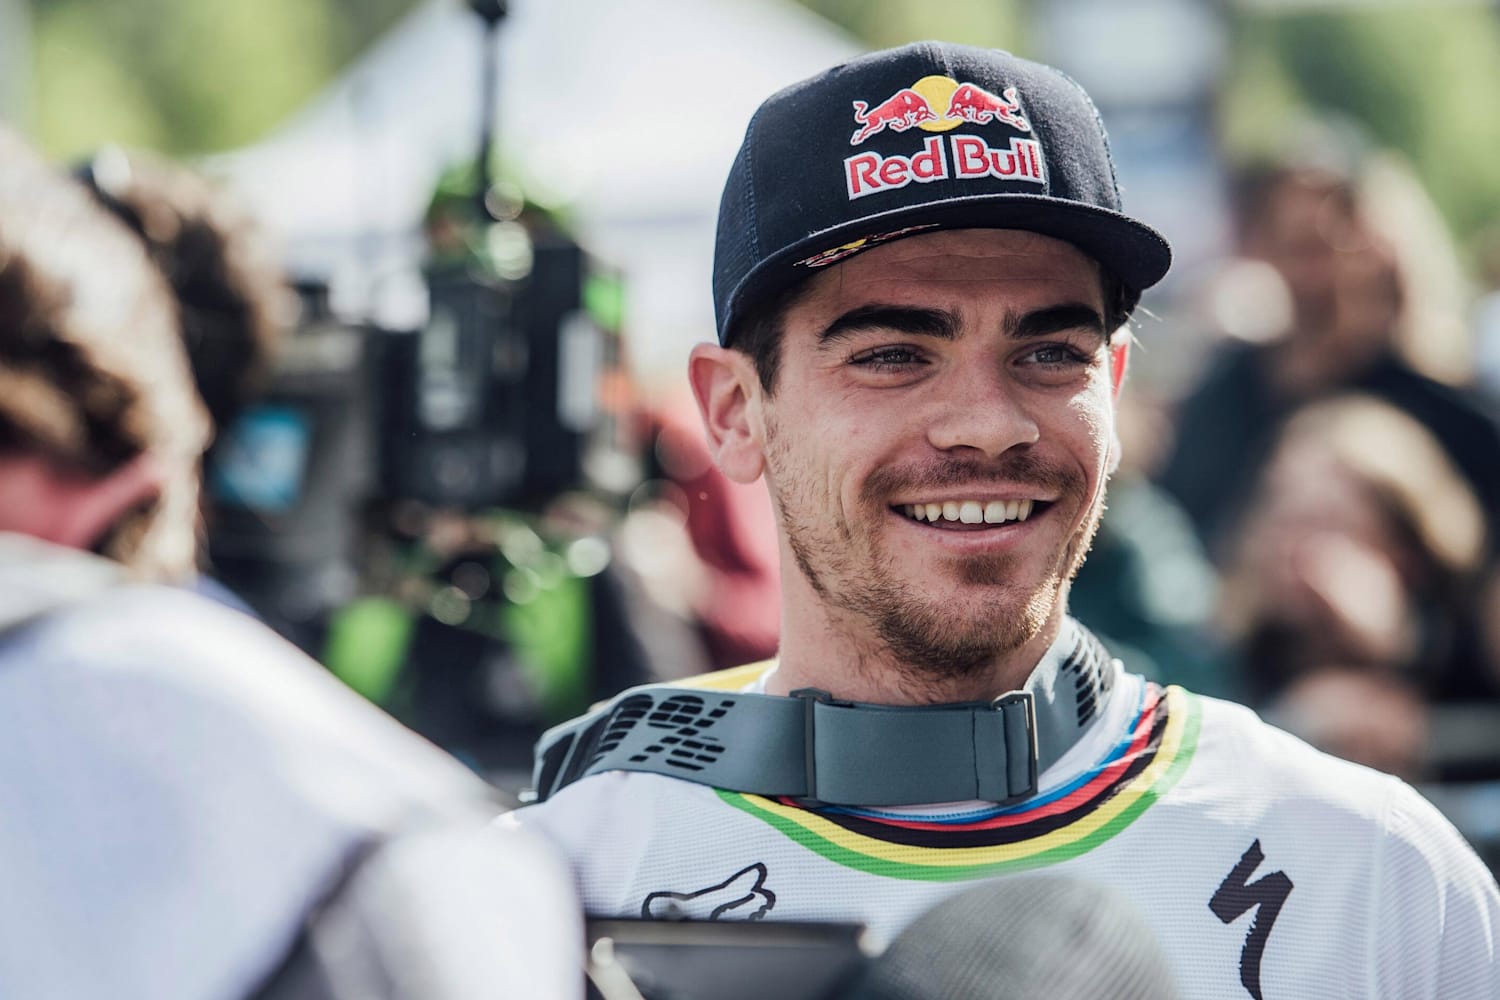 Loic Bruni: Mountain Bike DH – Red Bull Athlete Page